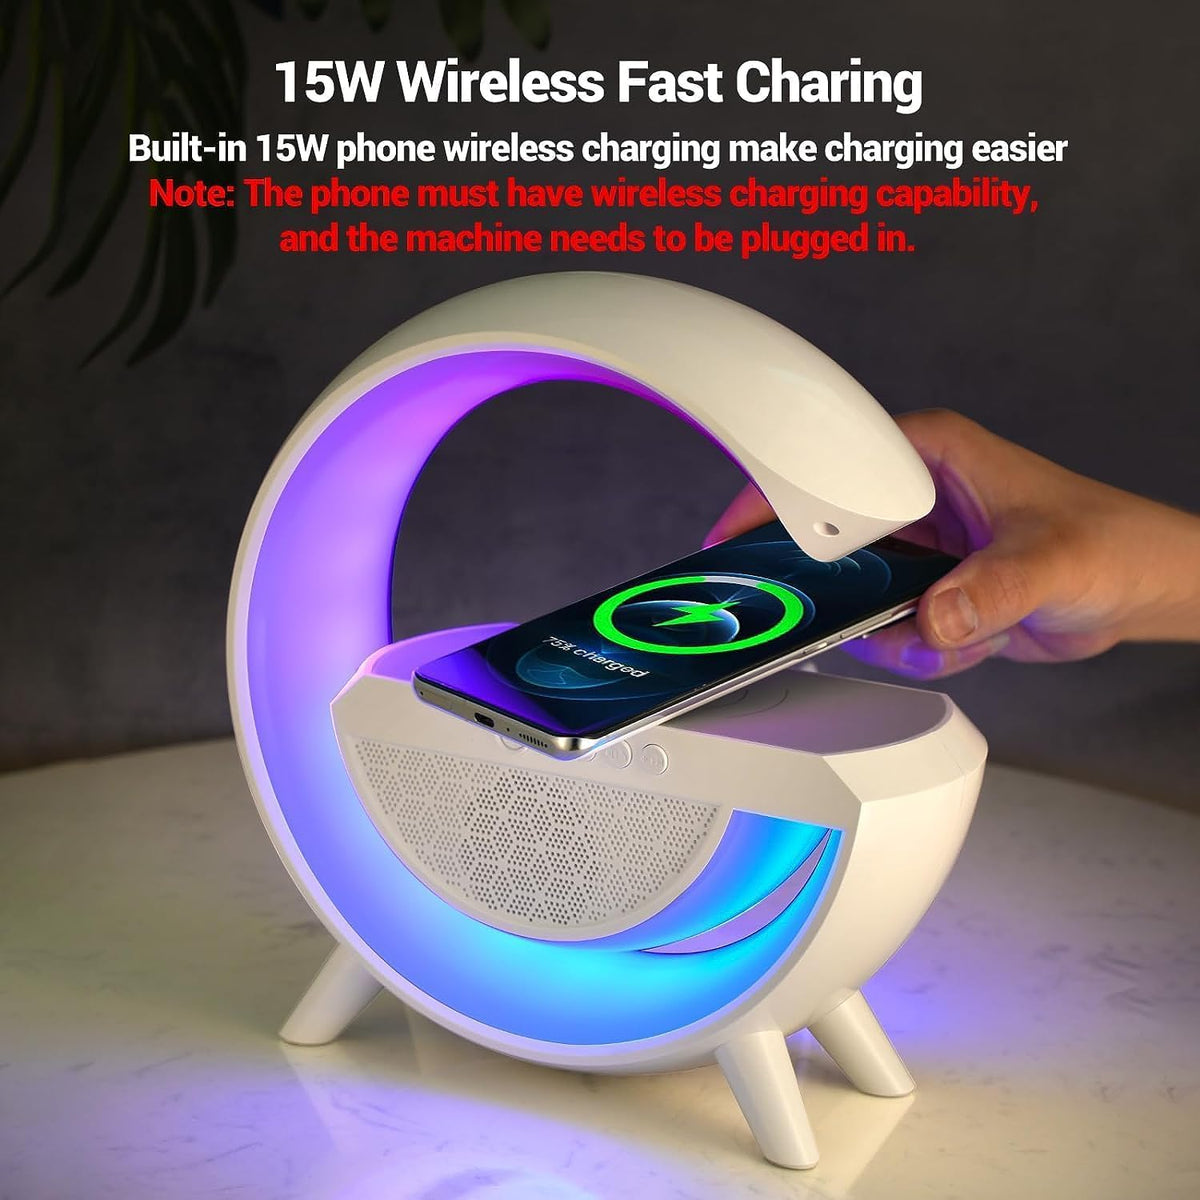 "Transform Your Space: G-Shape Multifunctional Wireless Charger Speaker - 15W Fast Charging, Atmosphere Lamp, FM Radio, Bluetooth, RGB Music Sync, Ideal for Bedroom Ambiance!"